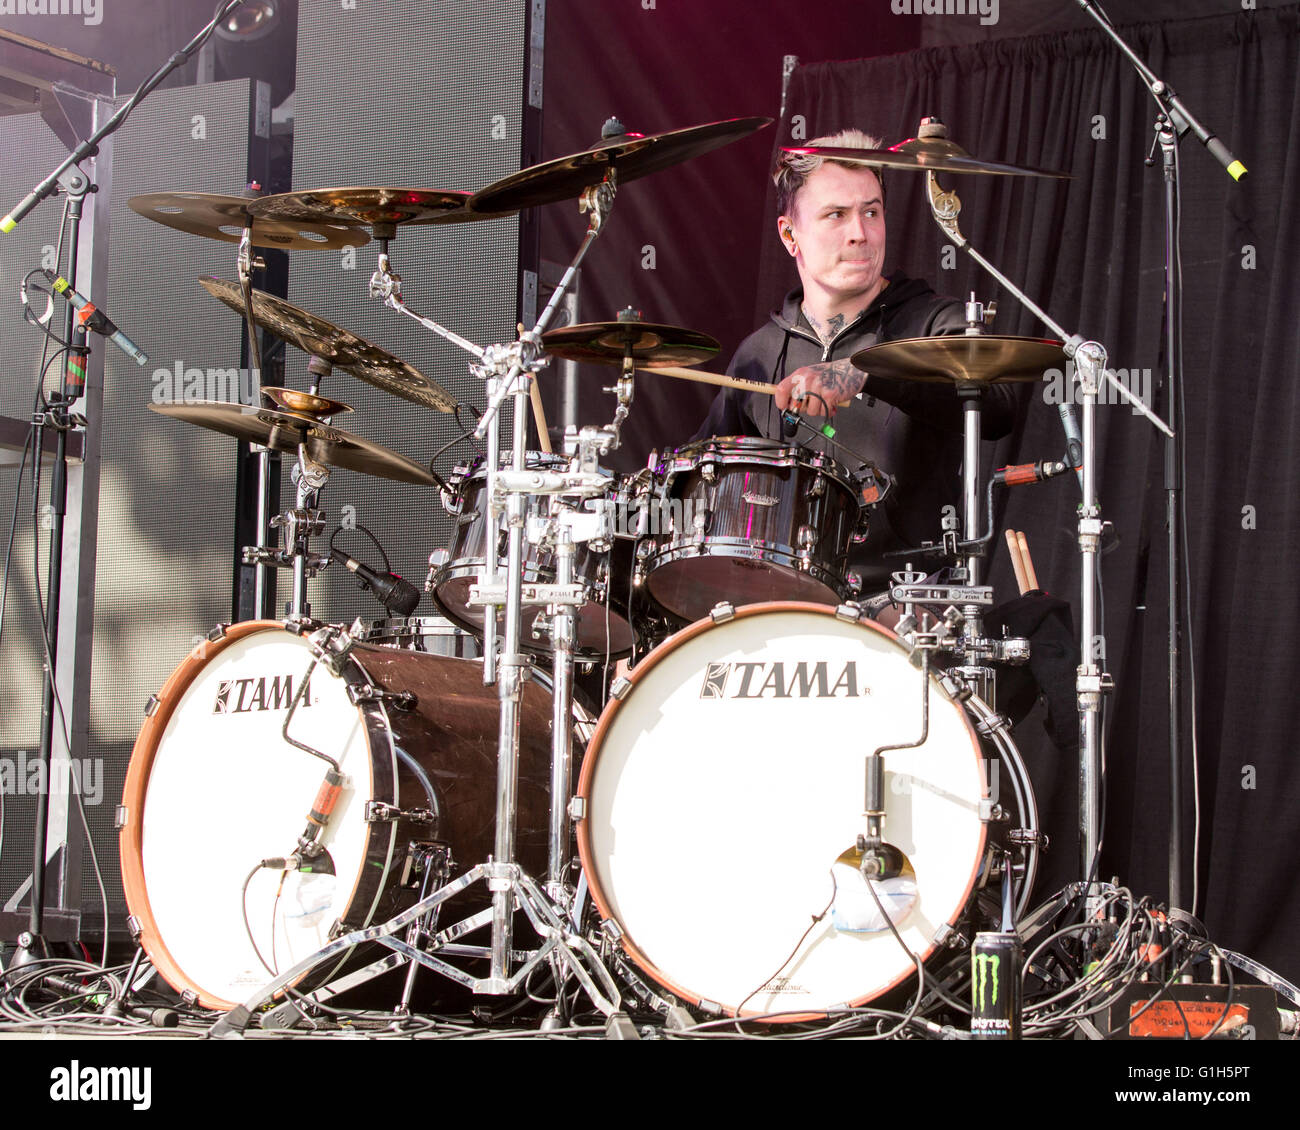 Somerset, Wisconsin, USA. 14th May, 2016. Drummer JAMES CASSELLS of Asking  Alexandria performs live at Somerset Amphitheater during the Northern  Invasion Music Festival in Somerset, Wisconsin © Daniel DeSlover/ZUMA  Wire/Alamy Live News